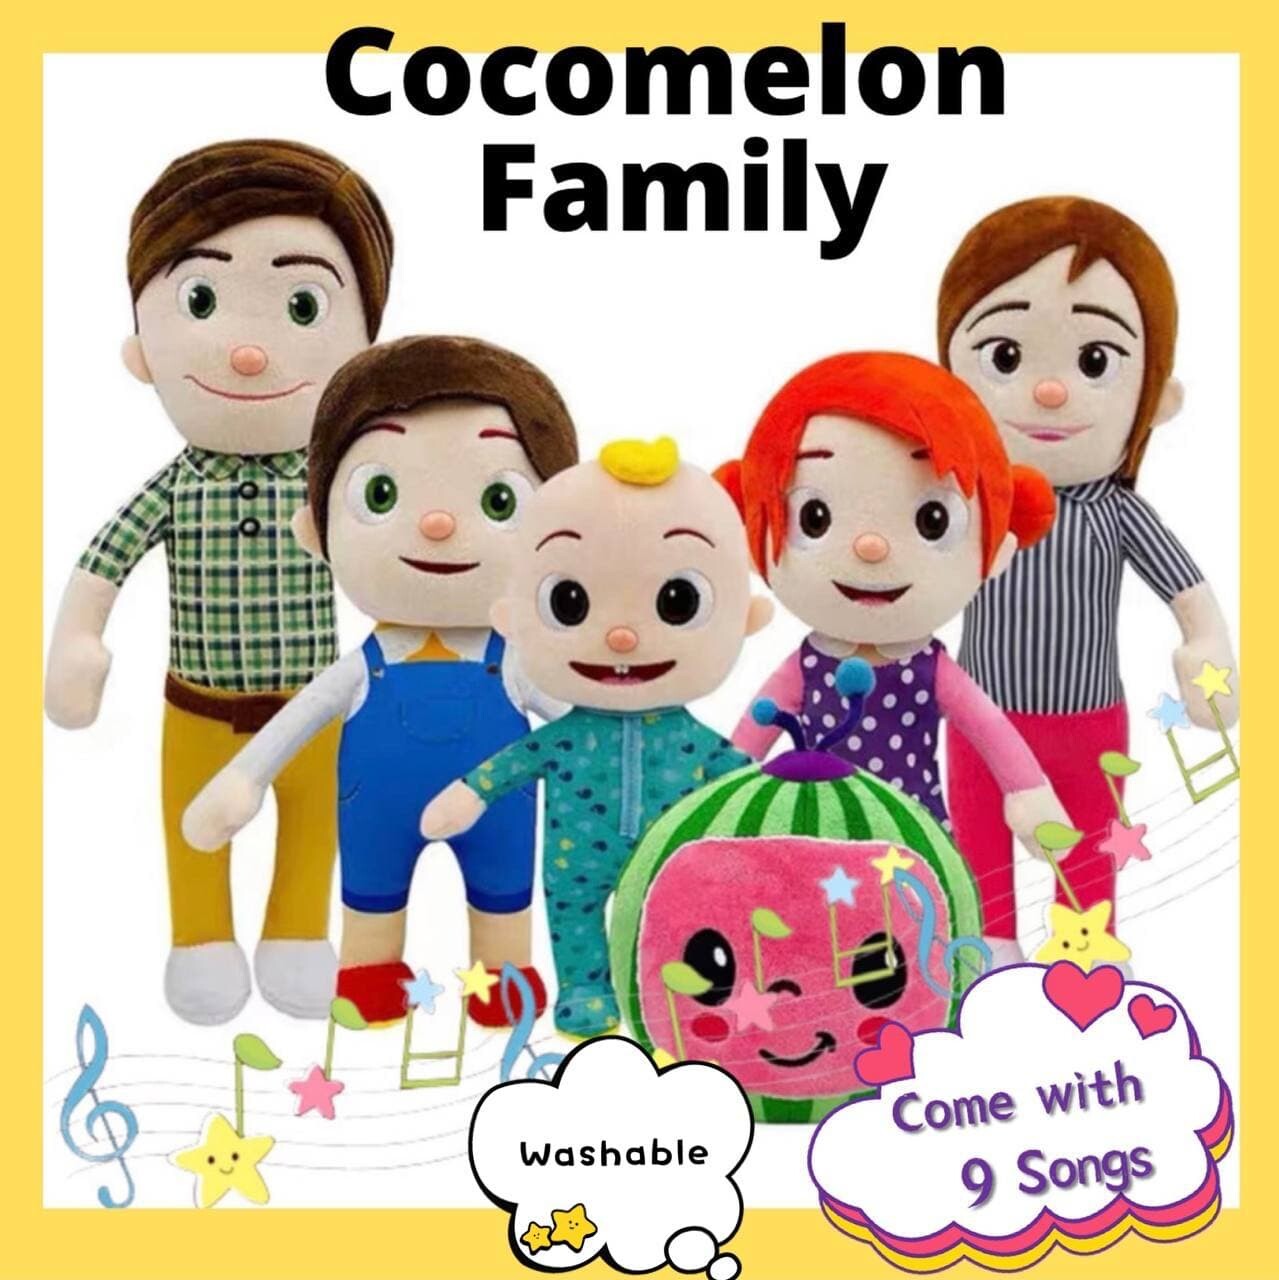 Little Baby Cocomelon Cartoon Toys Music Daddy Mummy Brother JJ Family  Washable or Non Washable Kids CNY Gift Present Sleep Toy Children Singing  Soft Toys Doll Plush Toys Ready Stock In Selangor